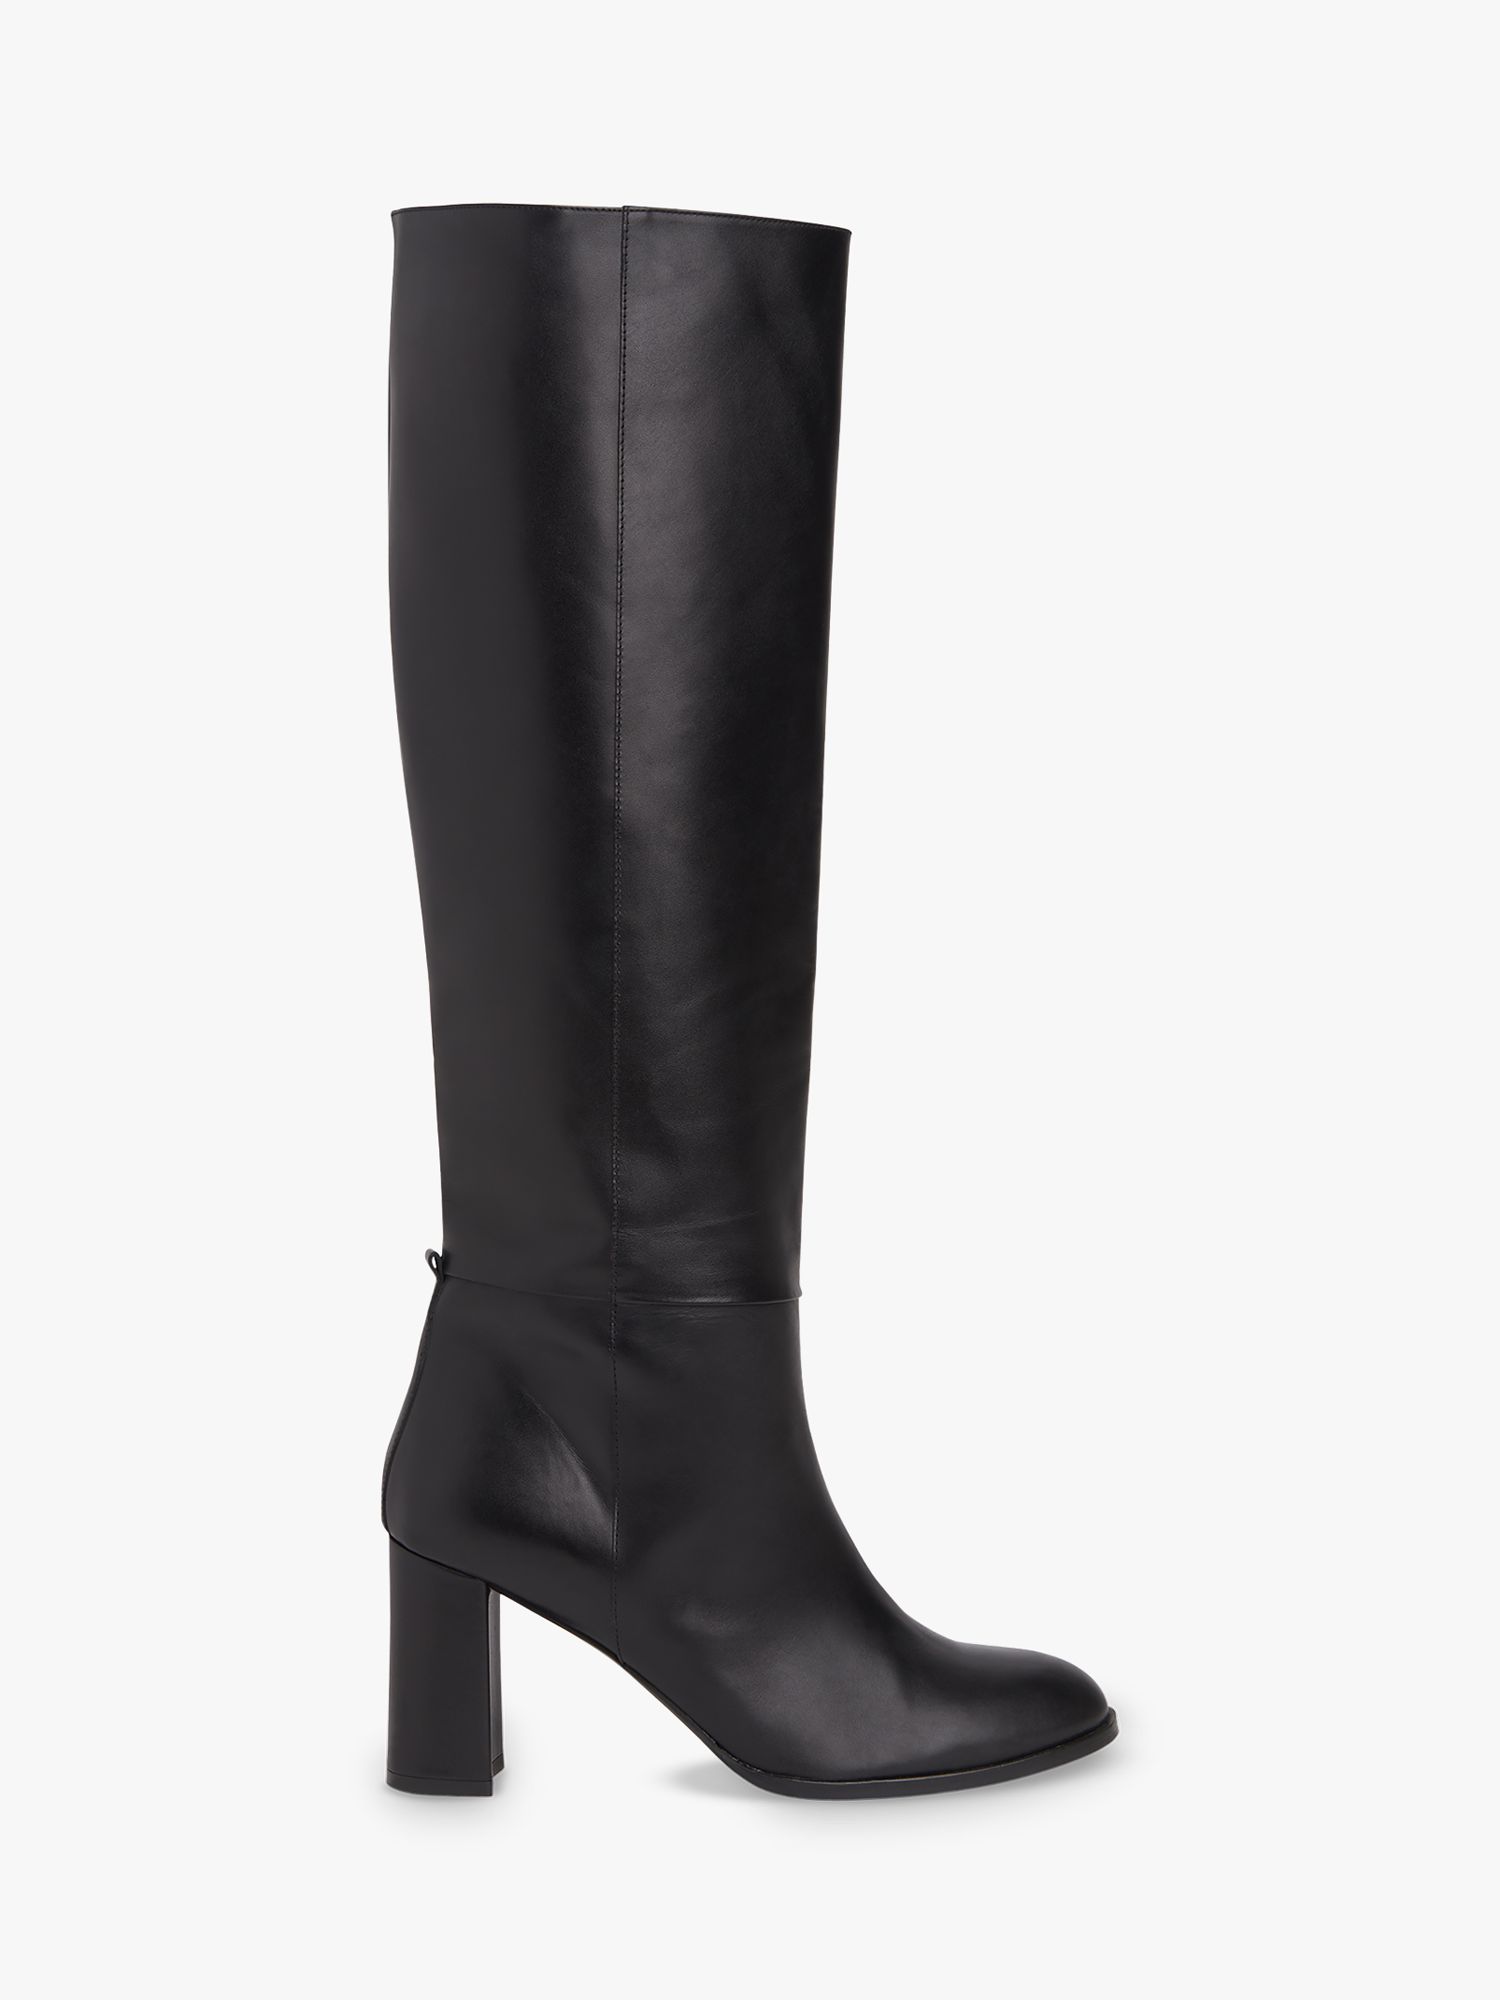 Whistles Gibson Leather Knee High Boots, Black at John Lewis & Partners